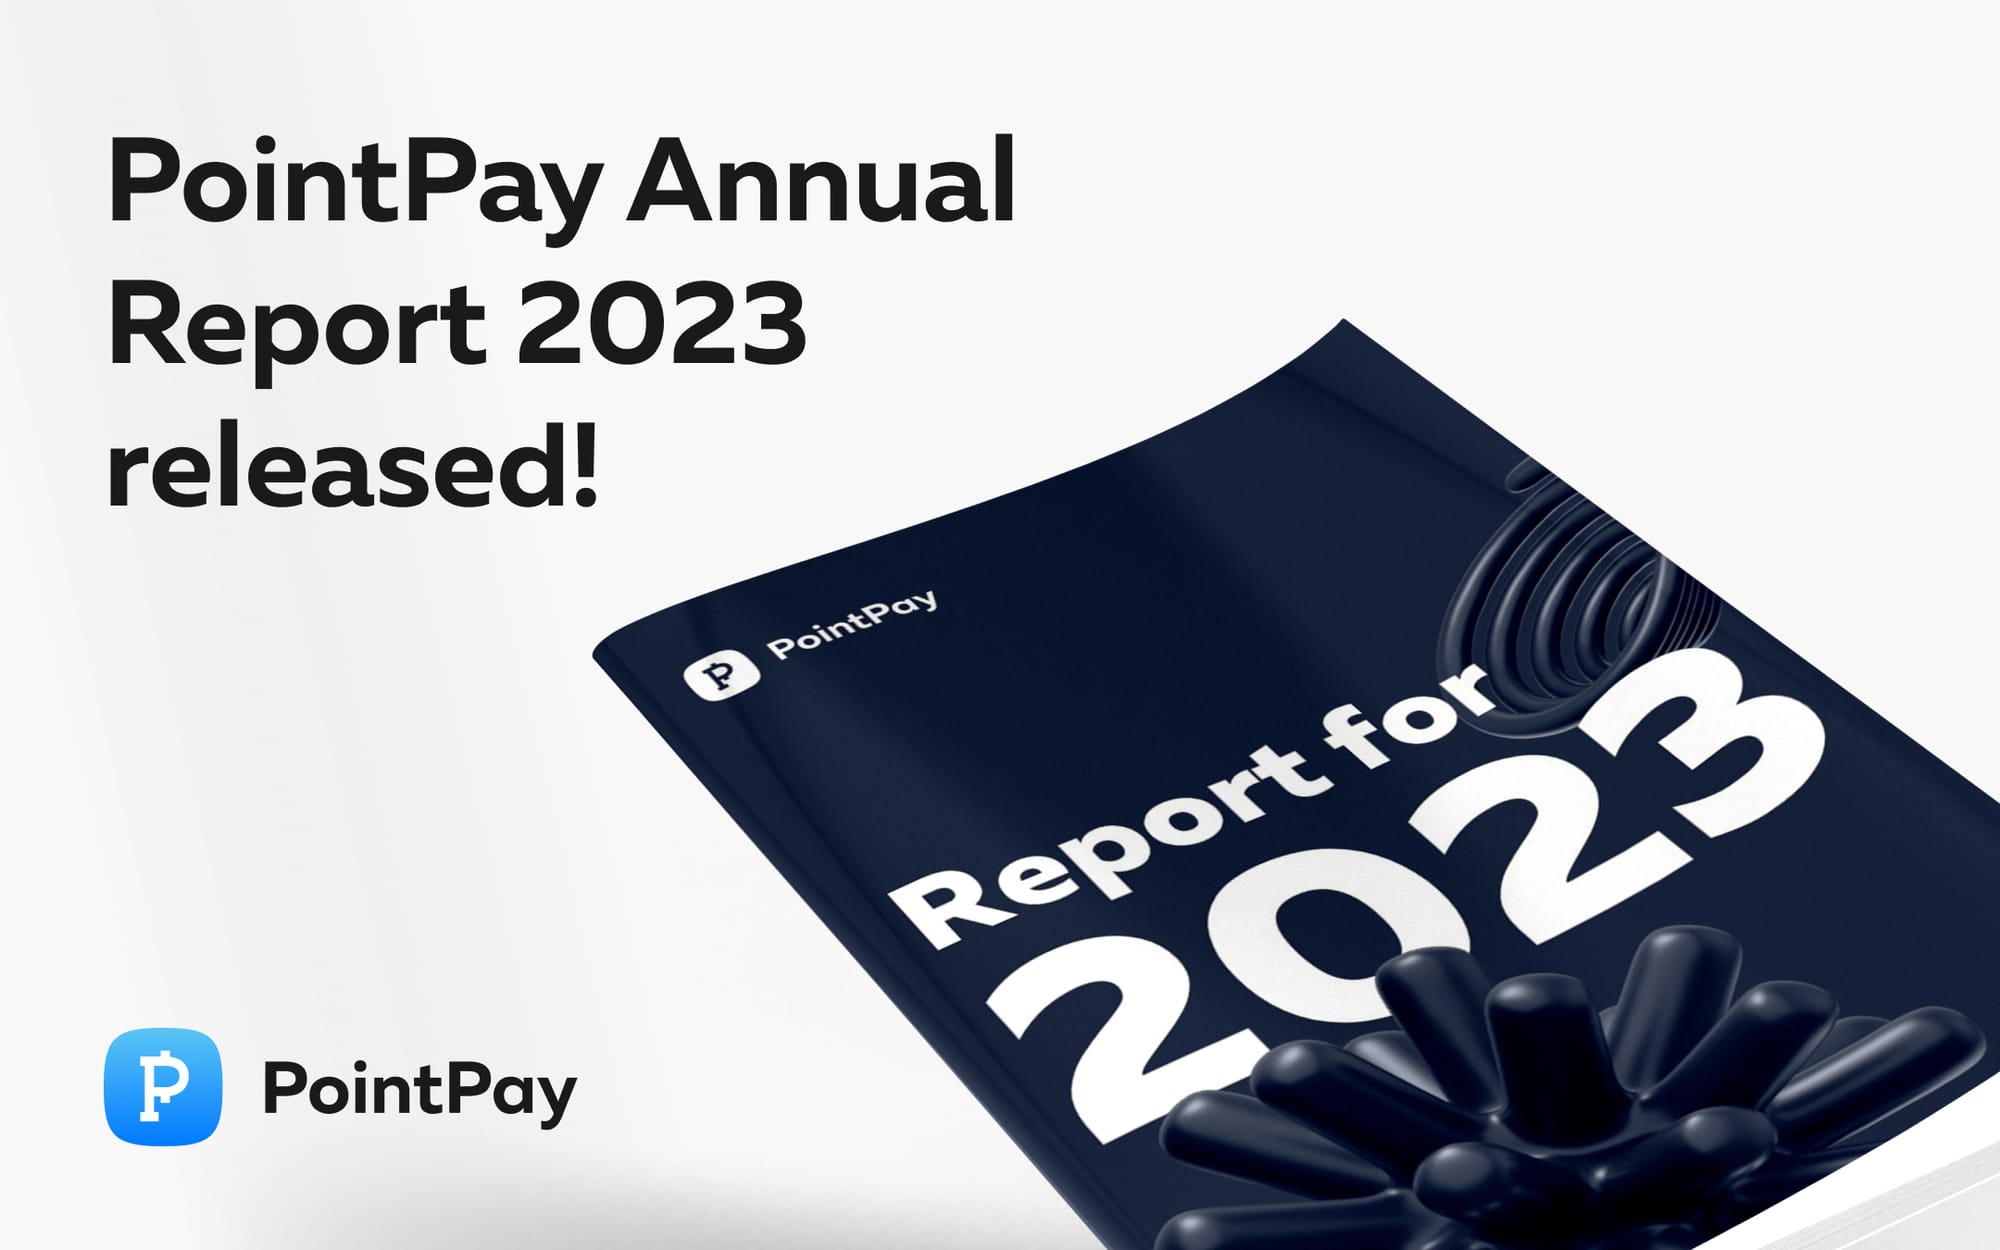 PointPay Annual Report 2023 Released!